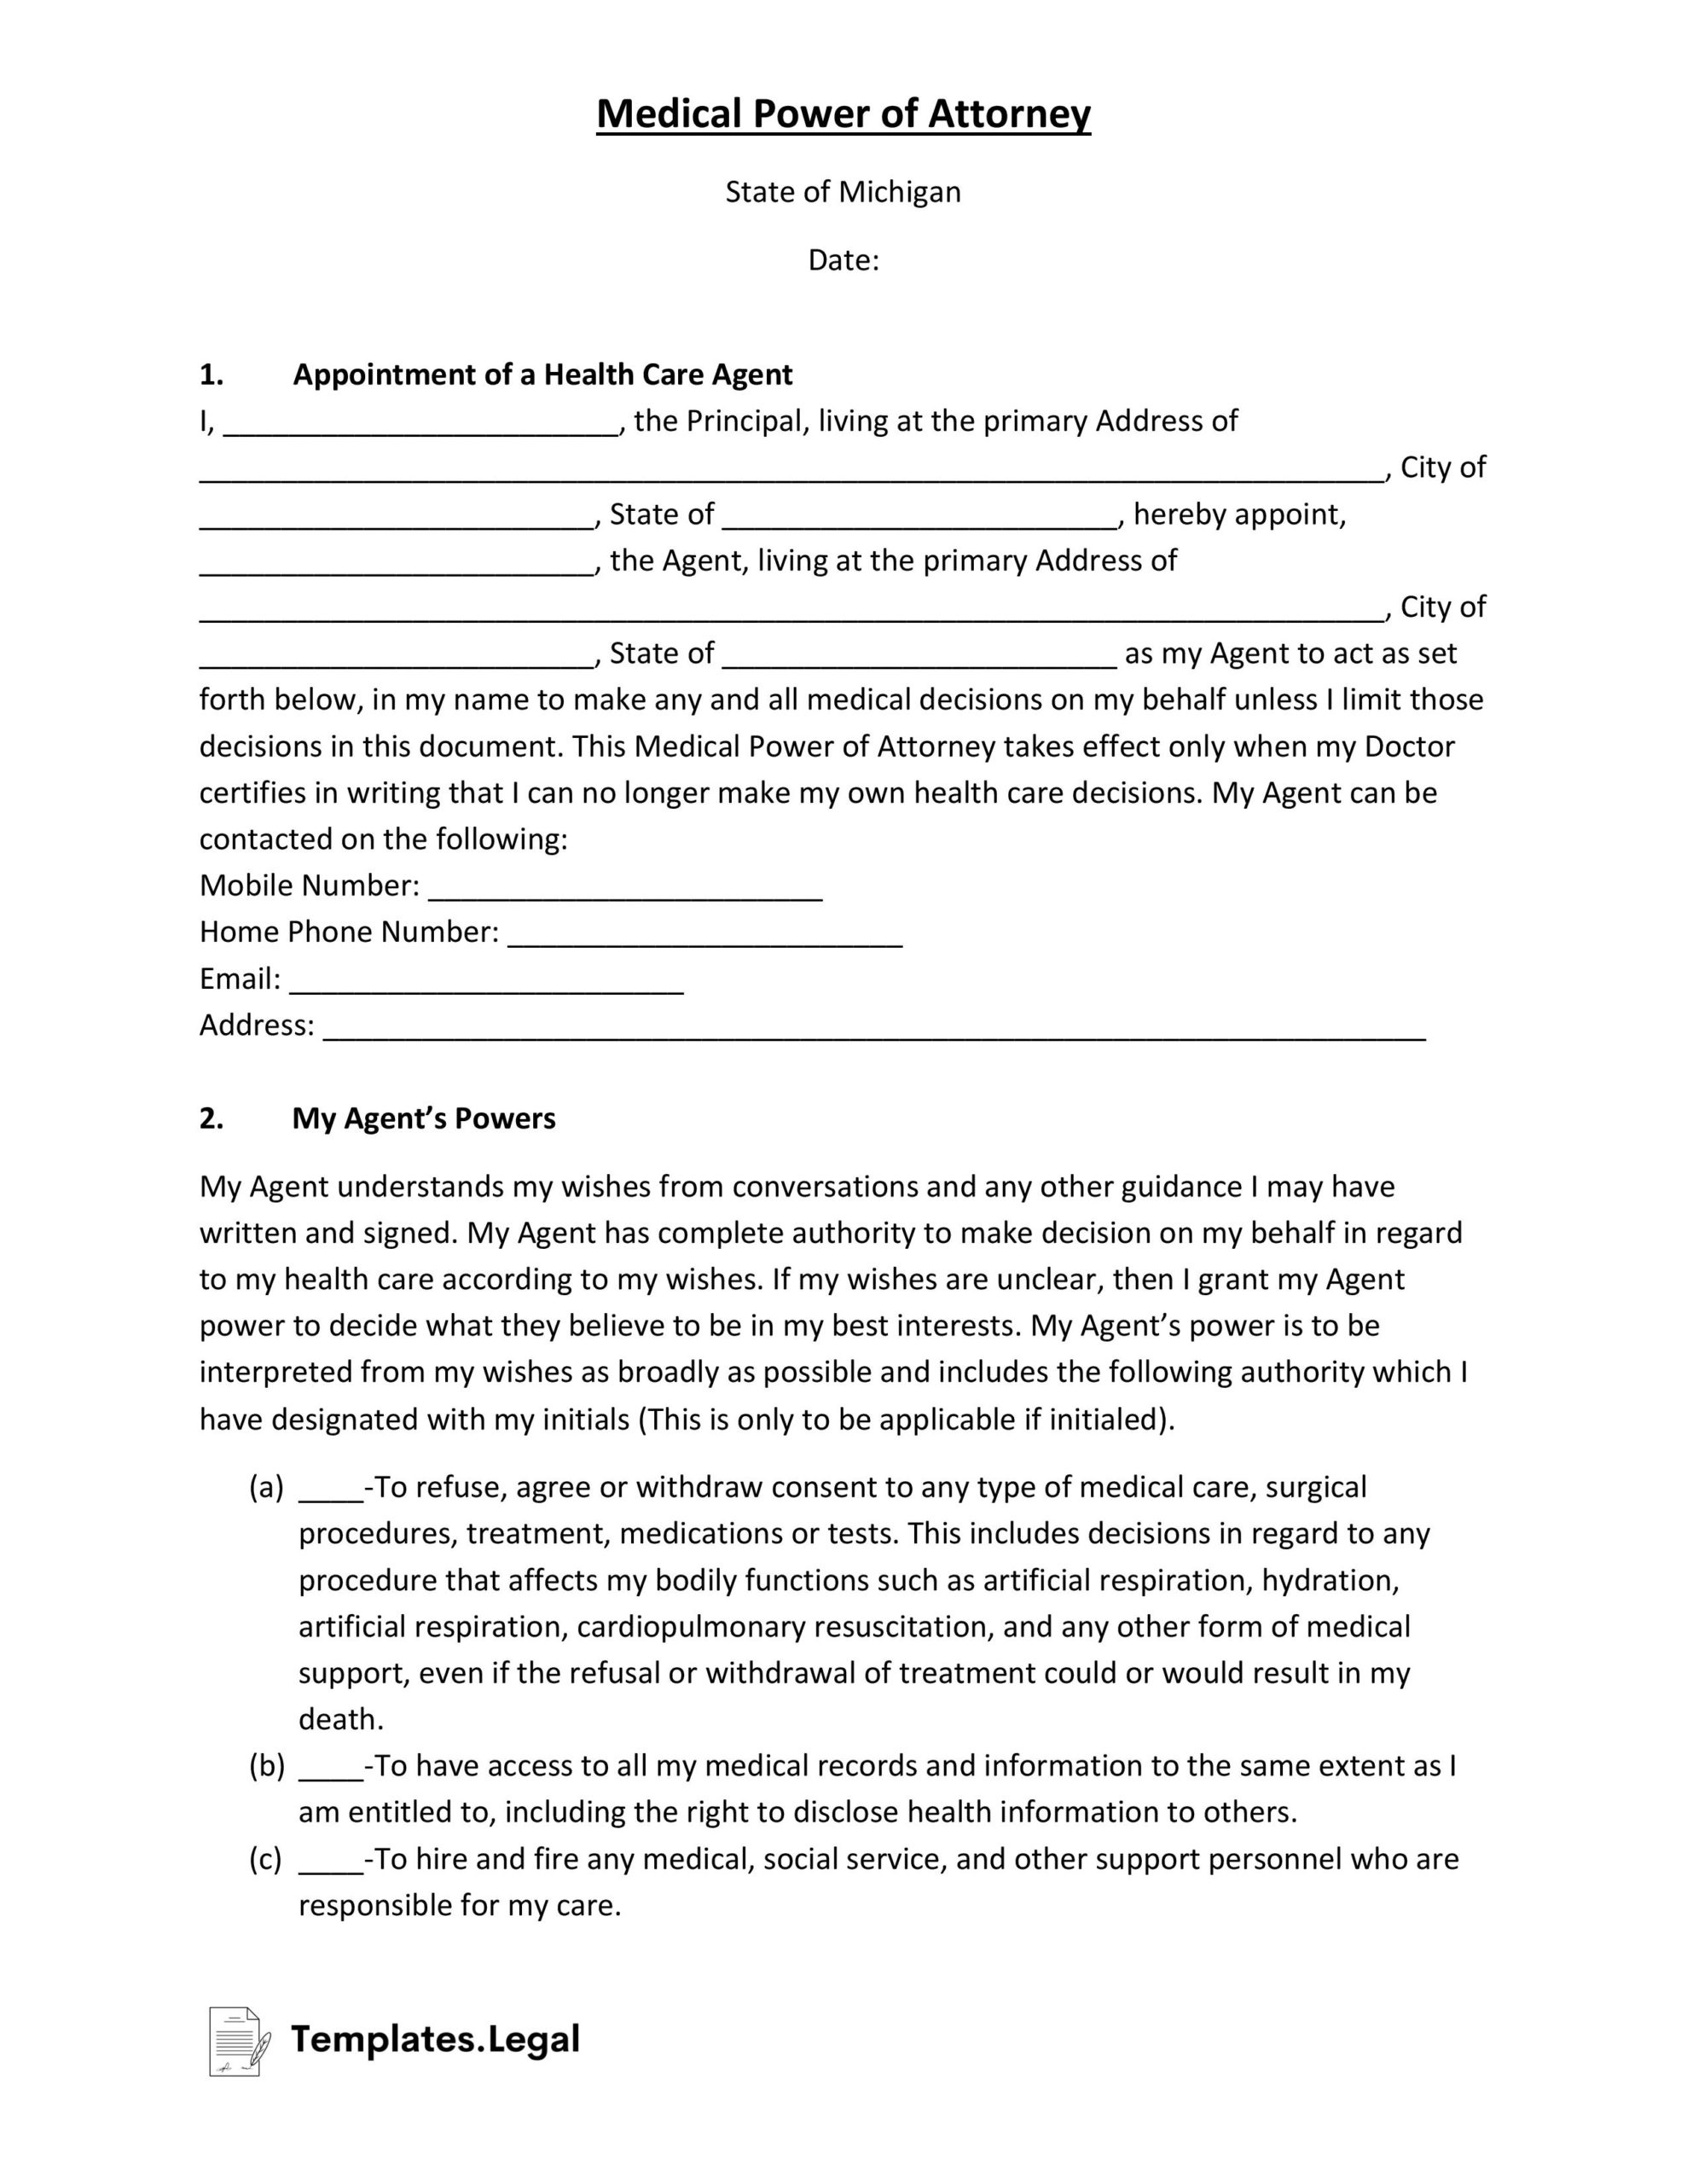 Michigan Medical Power of Attorney- Templates.Legal